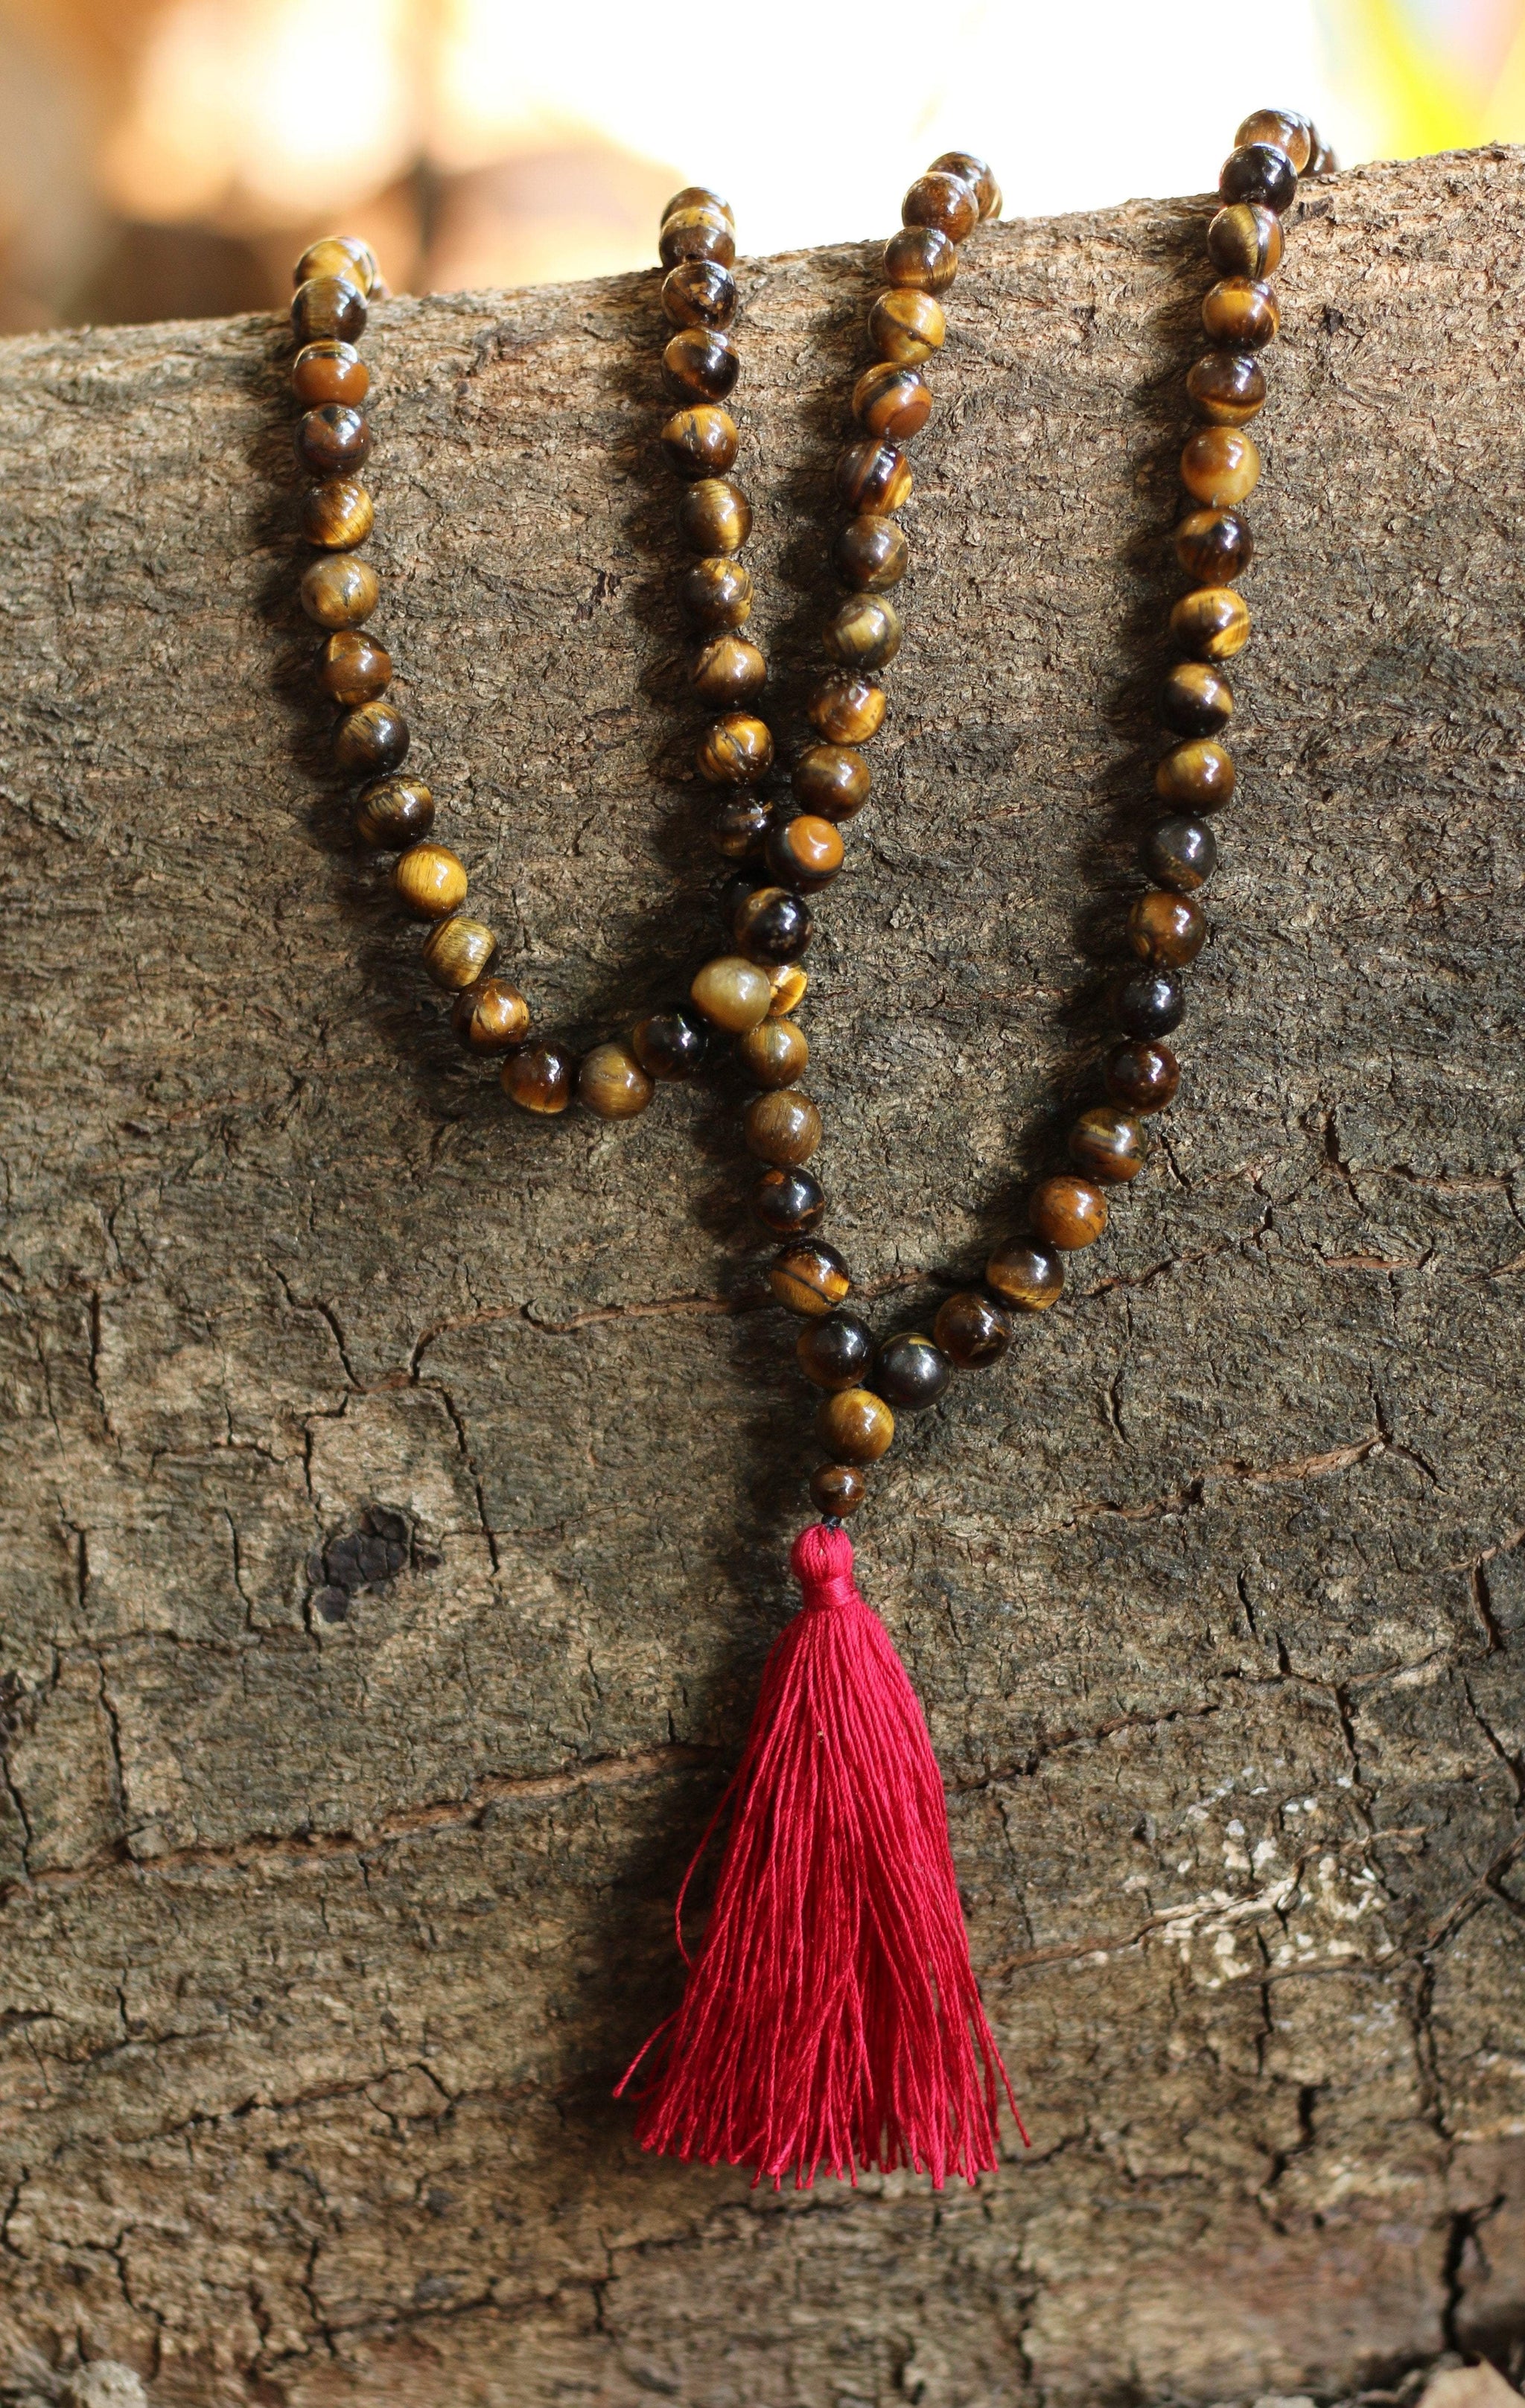 Tiger Eye Buddhist Mala Beads Necklace with Red Tassels - One